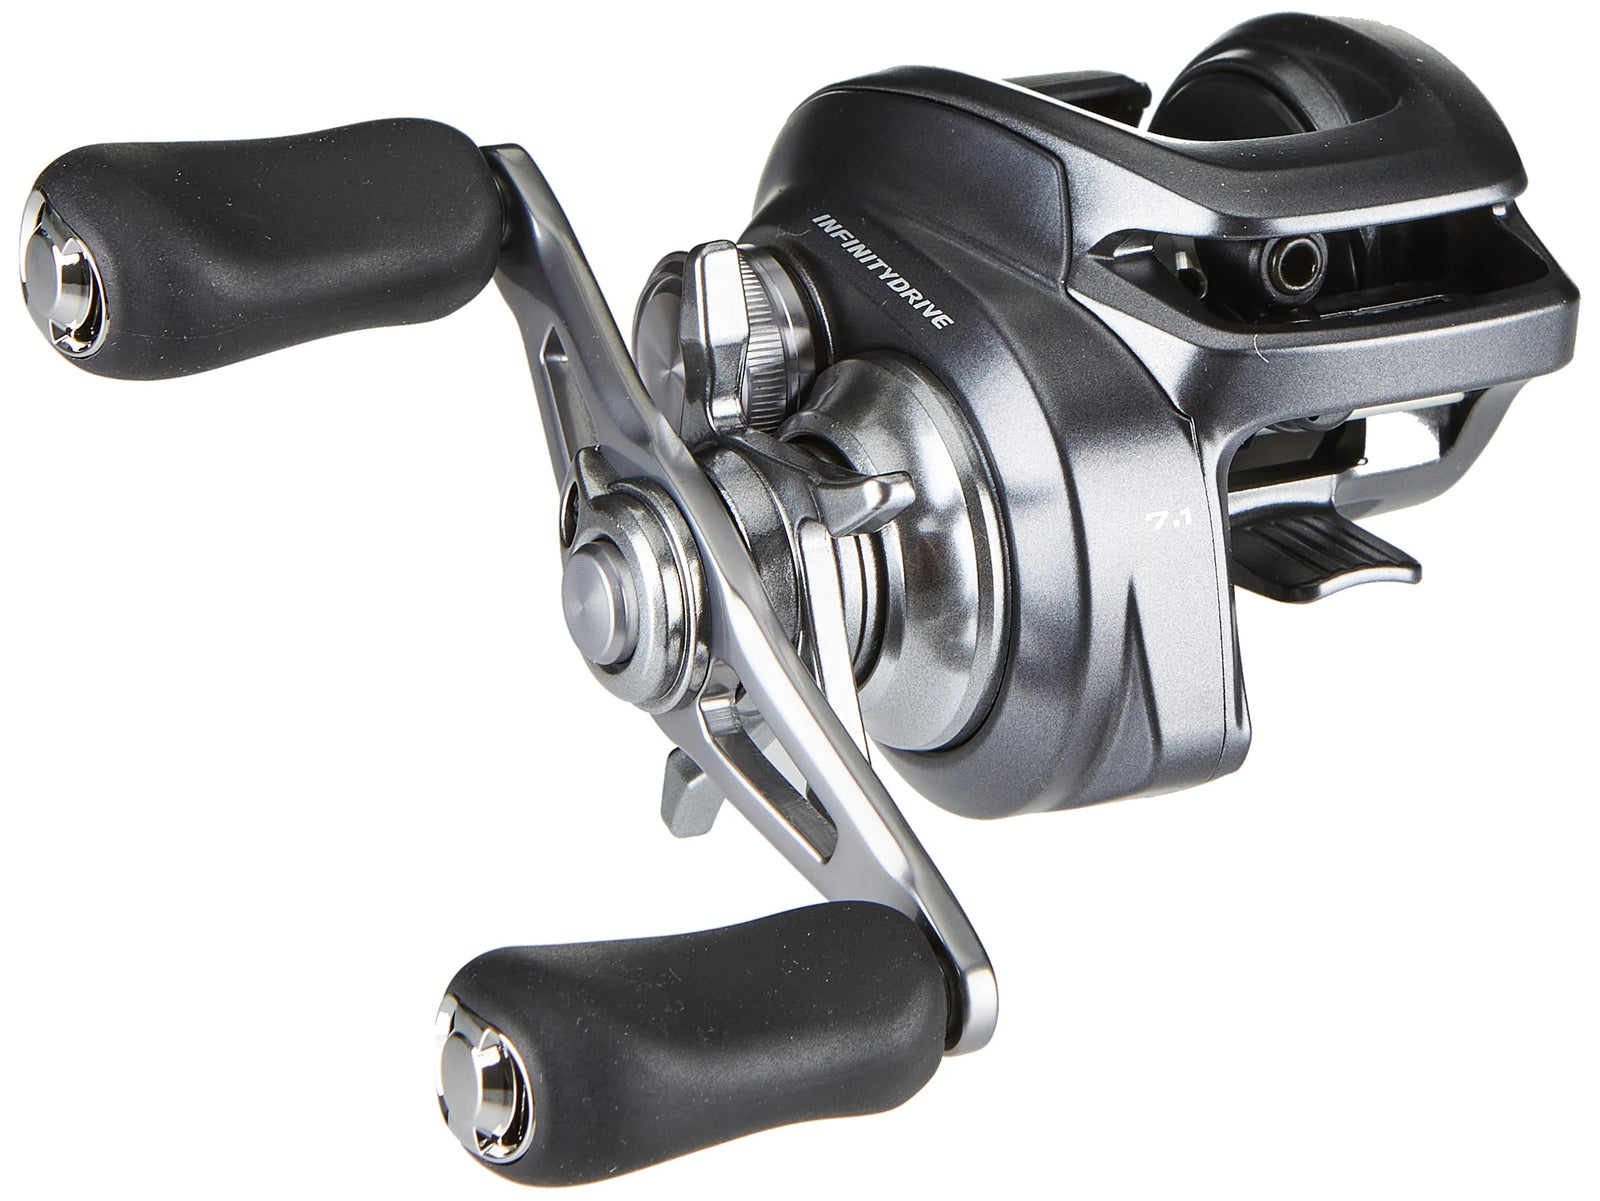 Fishing Reels For Sale - Shop for Spin, Overhead, Baitcast & more